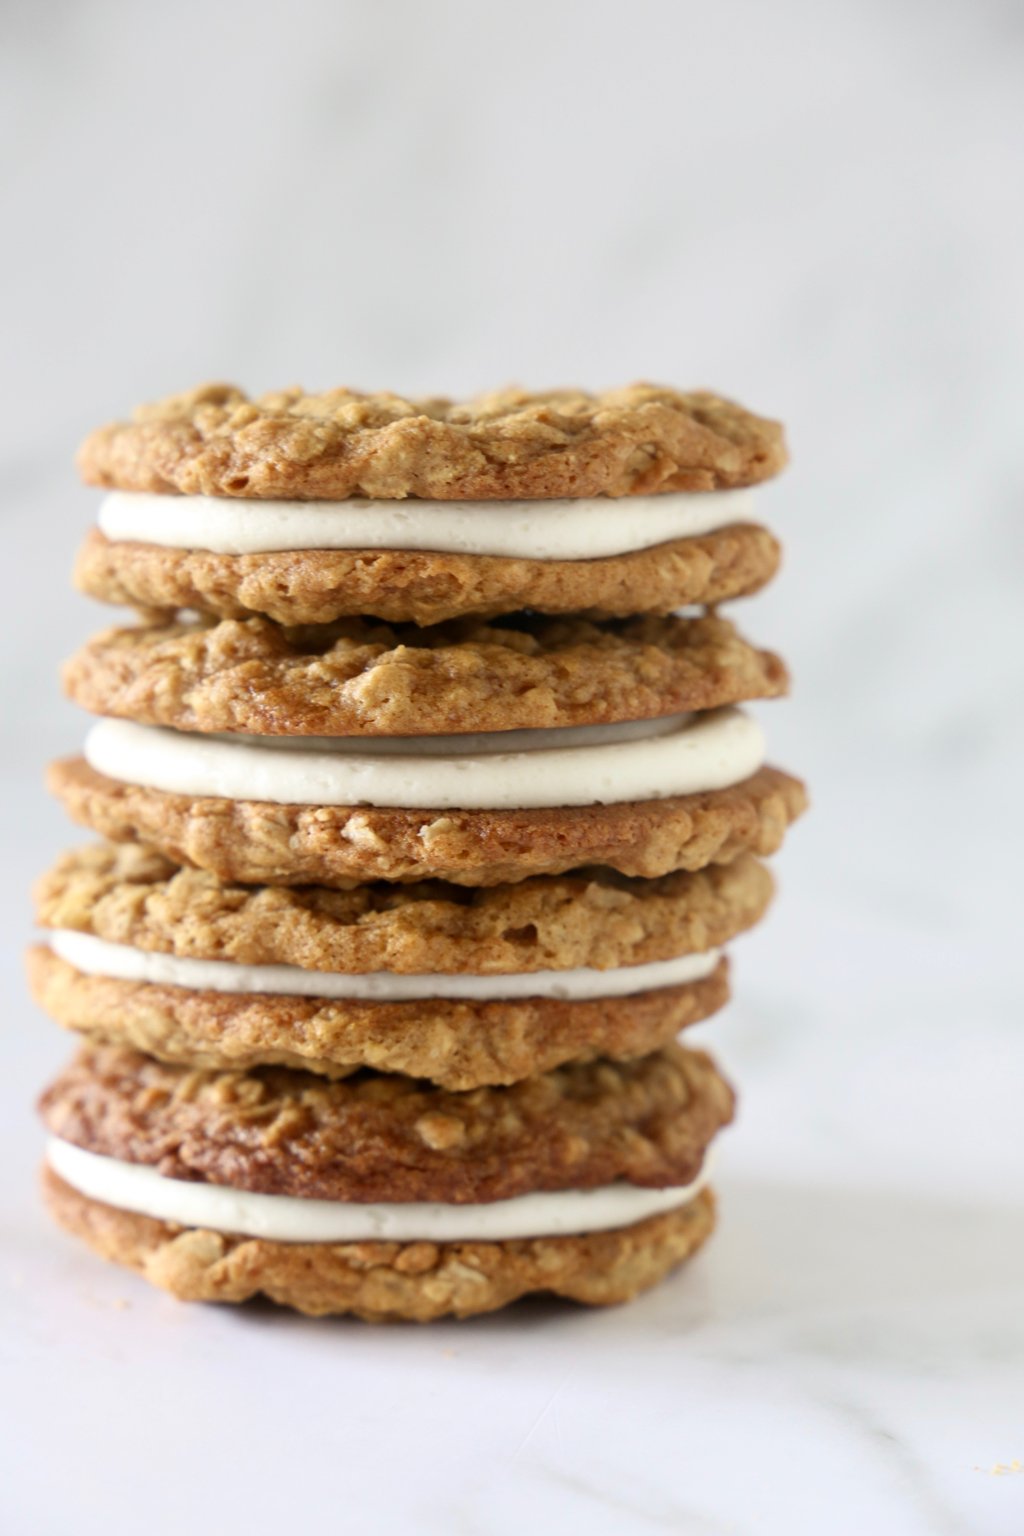 A stack of four sandwiched cookies.  